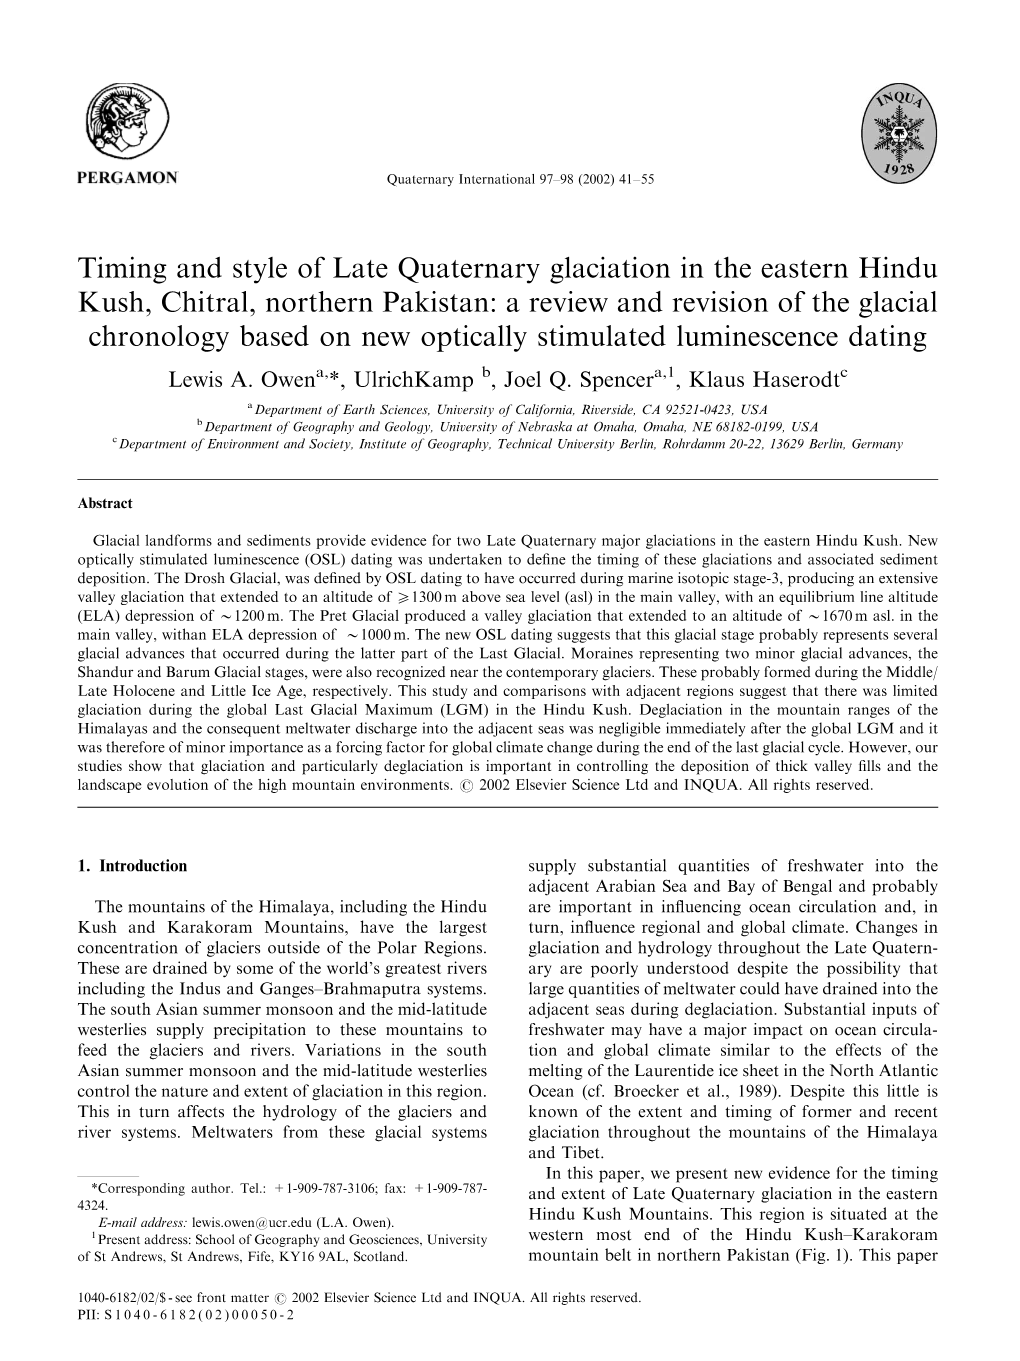 Timing and Style of Late Quaternary Glaciation in the Eastern Hindu